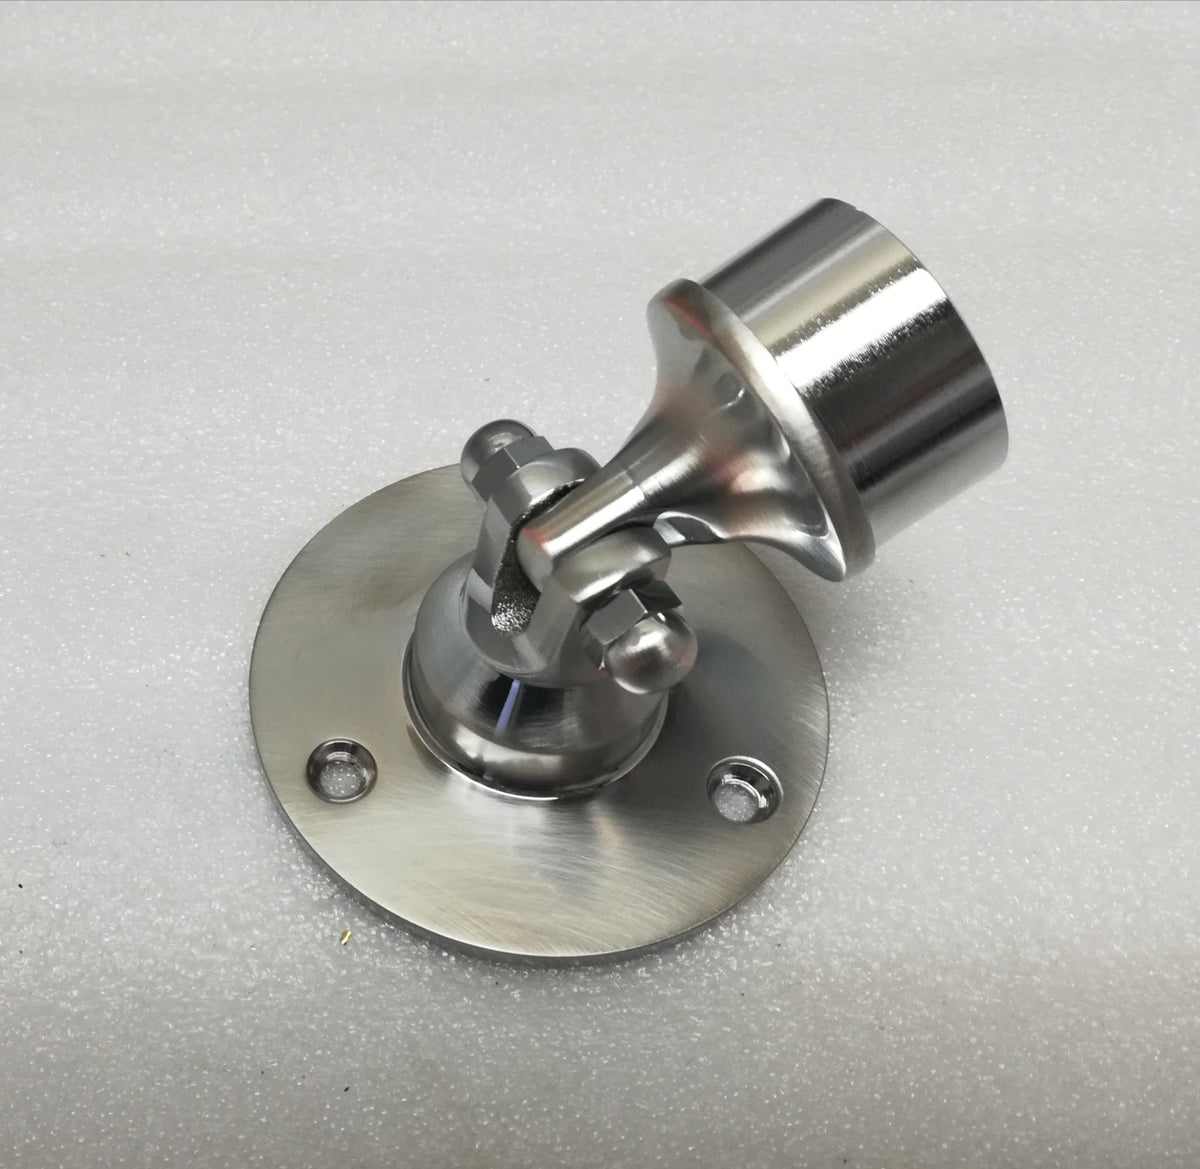 Adjustable Flange for 1-1/2" OD Tubing FLANGES AND ANCHORS,COMPONENTS FOR 1-1/2" OD TUBING Brushedchrome-specialfinishnon-returnable Trade Diversified